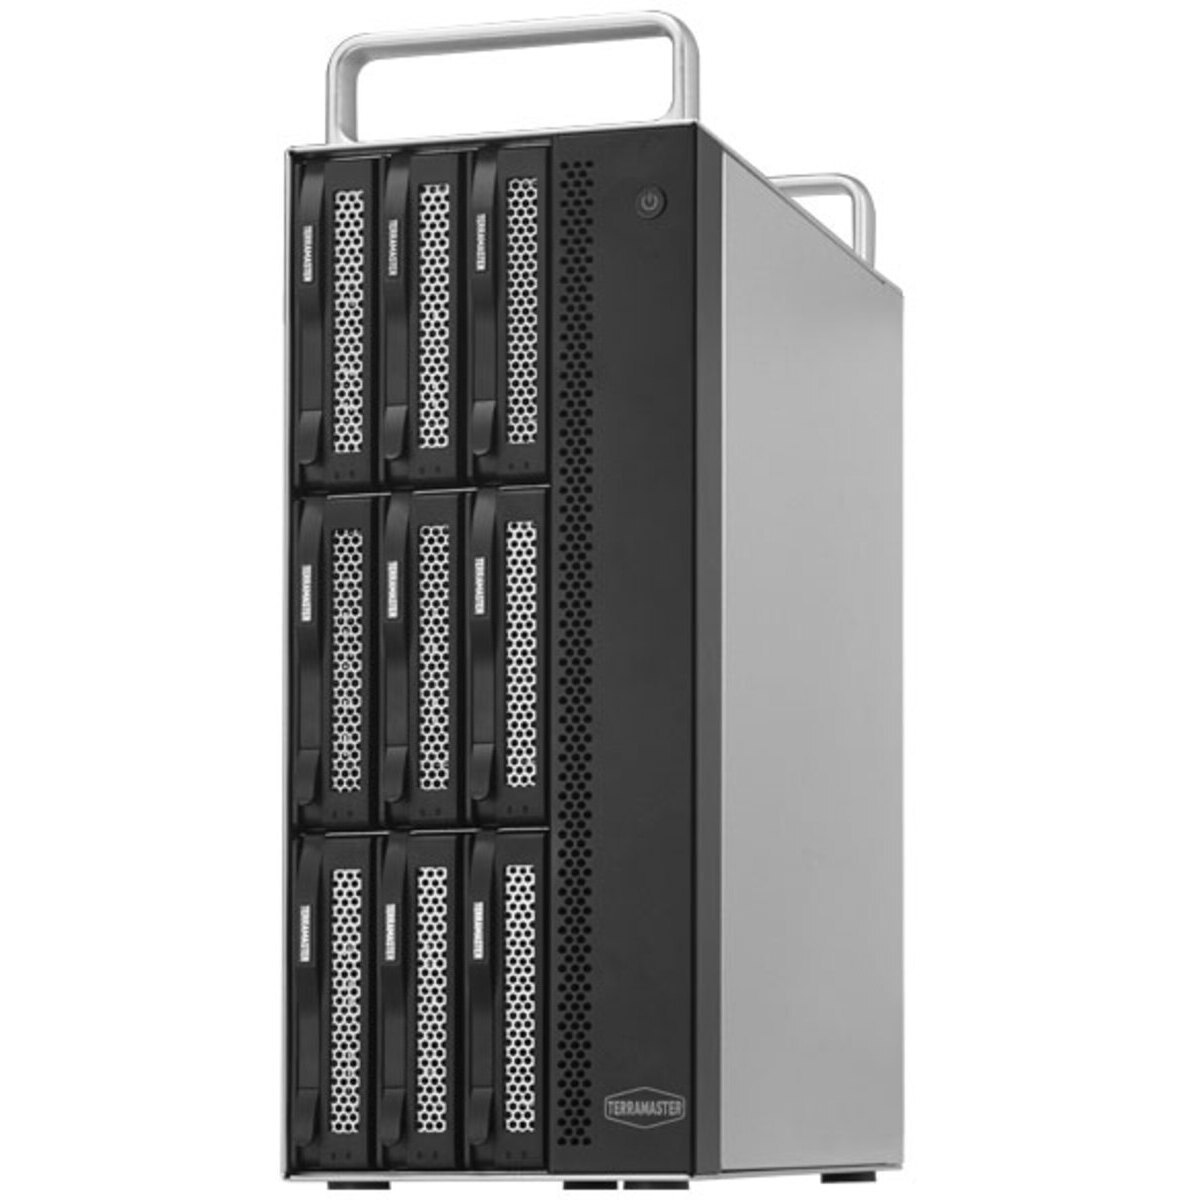 TerraMaster D8-322 32tb 8-Bay Desktop Multimedia / Power User / Business DAS - Direct Attached Storage Device 4x8tb Western Digital Red Pro WD8005FFBX 3.5 7200rpm SATA 6Gb/s HDD NAS Class Drives Installed - Burn-In Tested D8-322